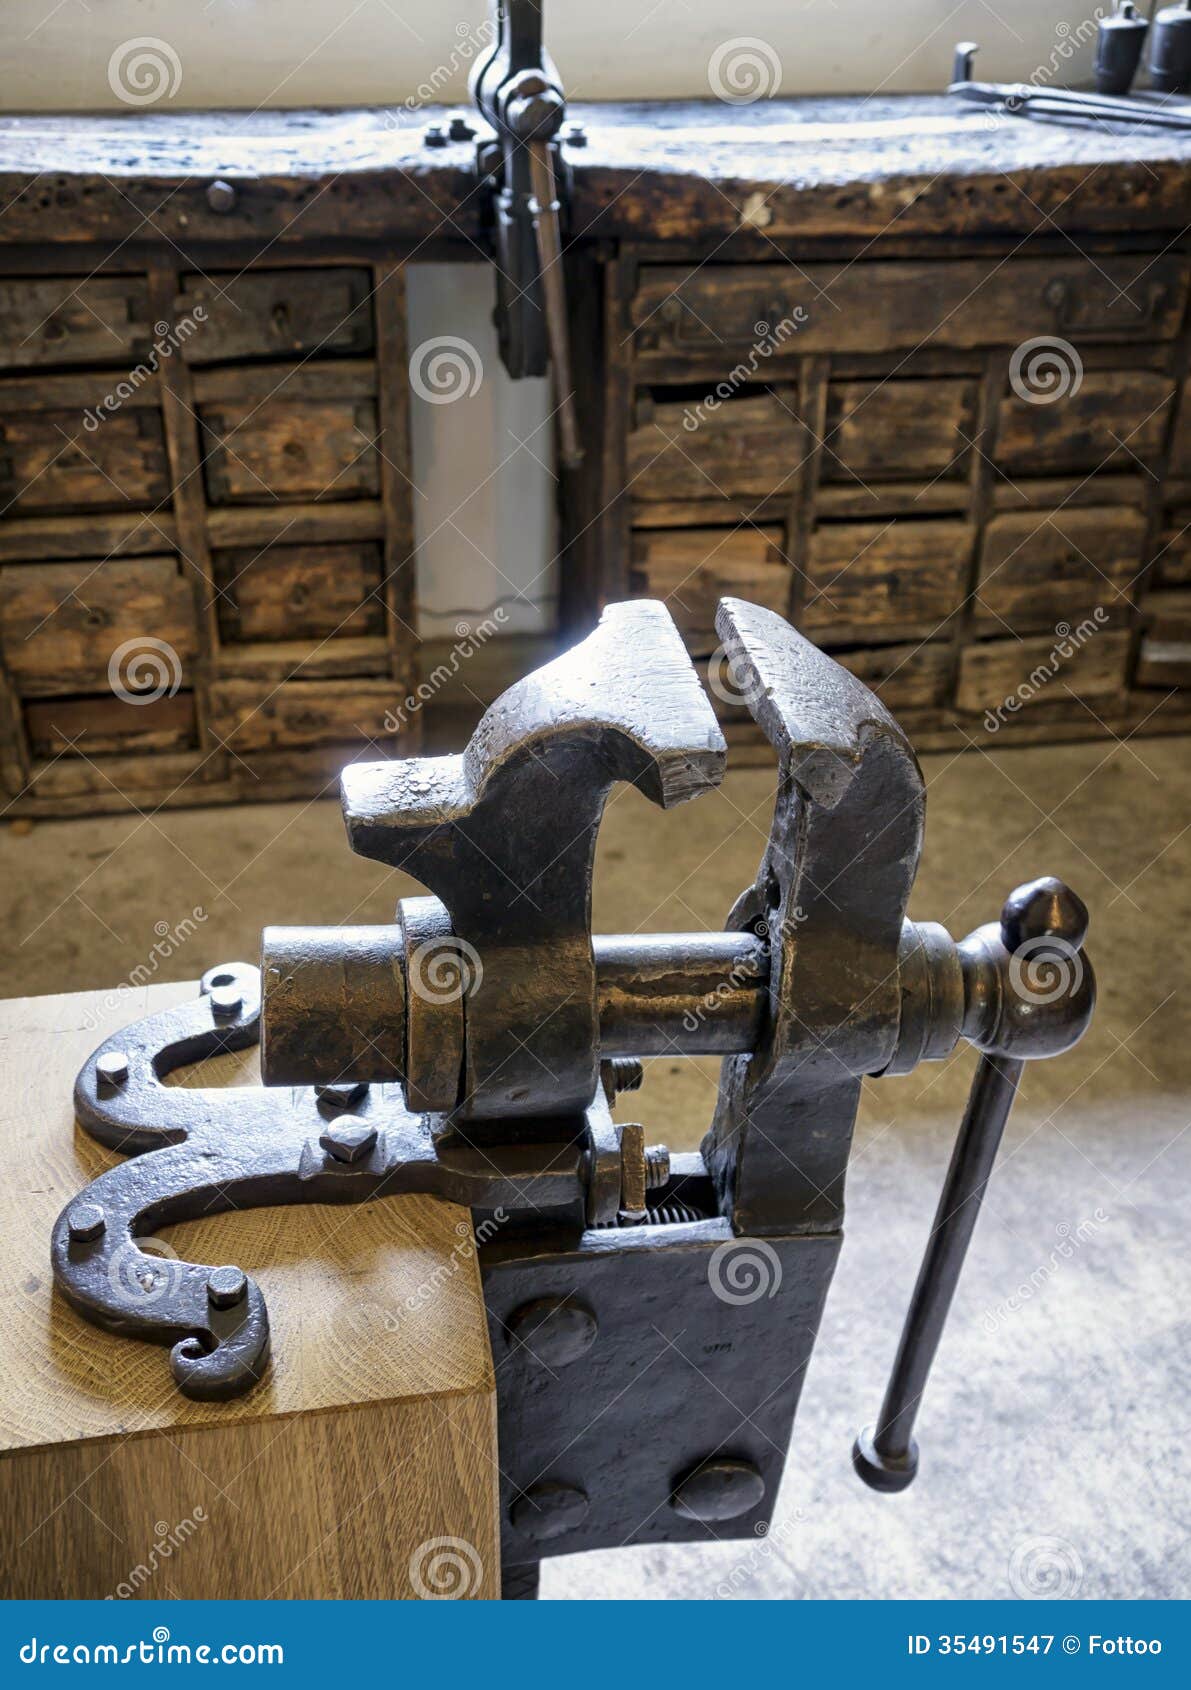 old bench vise stock image. image of stability, clamp